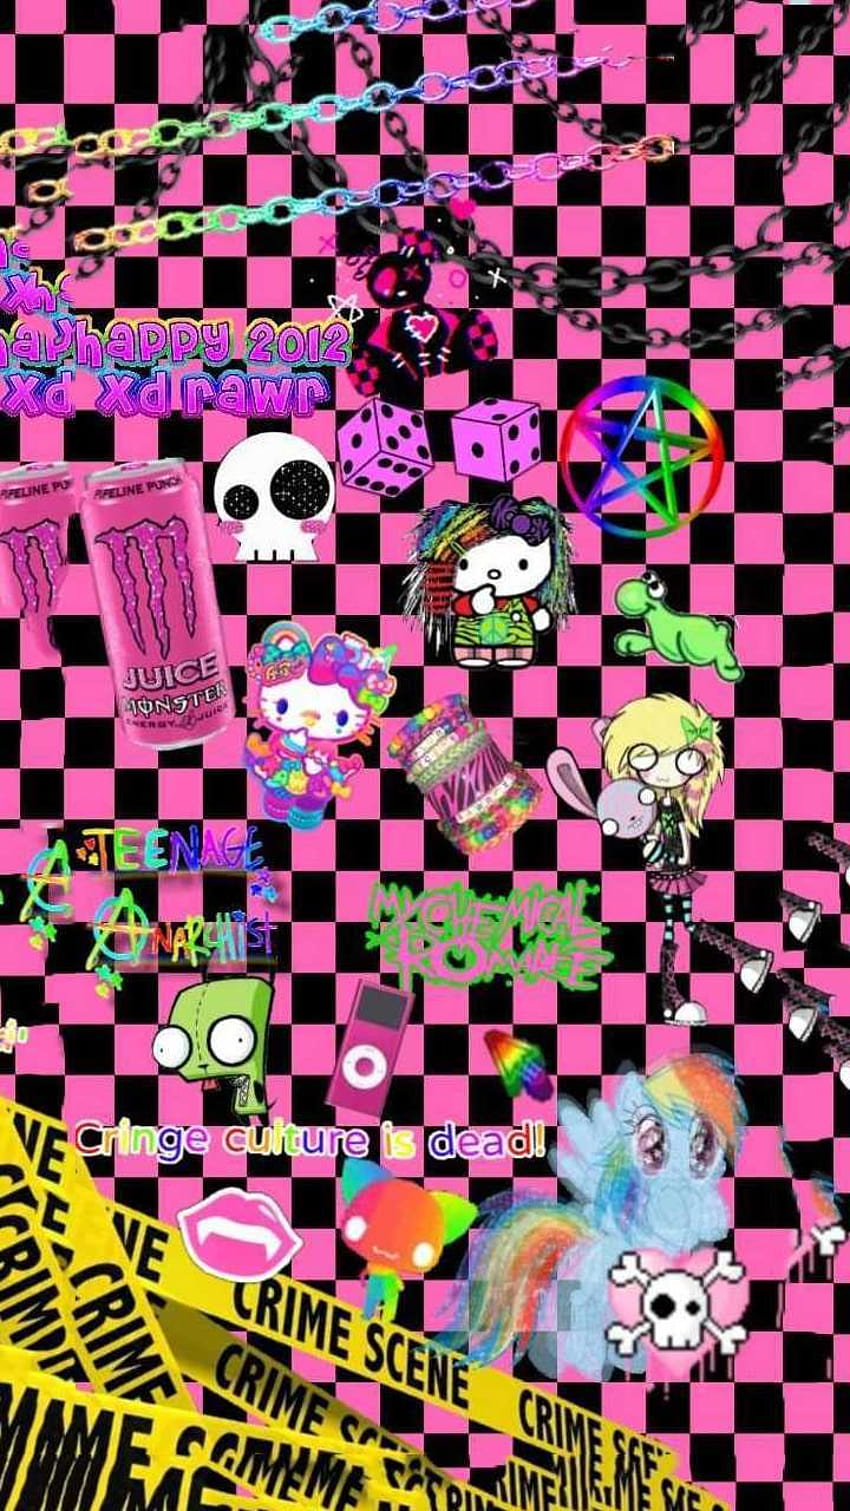 Weirdcore Wallpaper for your Phone  Scary dreams, Weirdcore aesthetic,  Creepy images